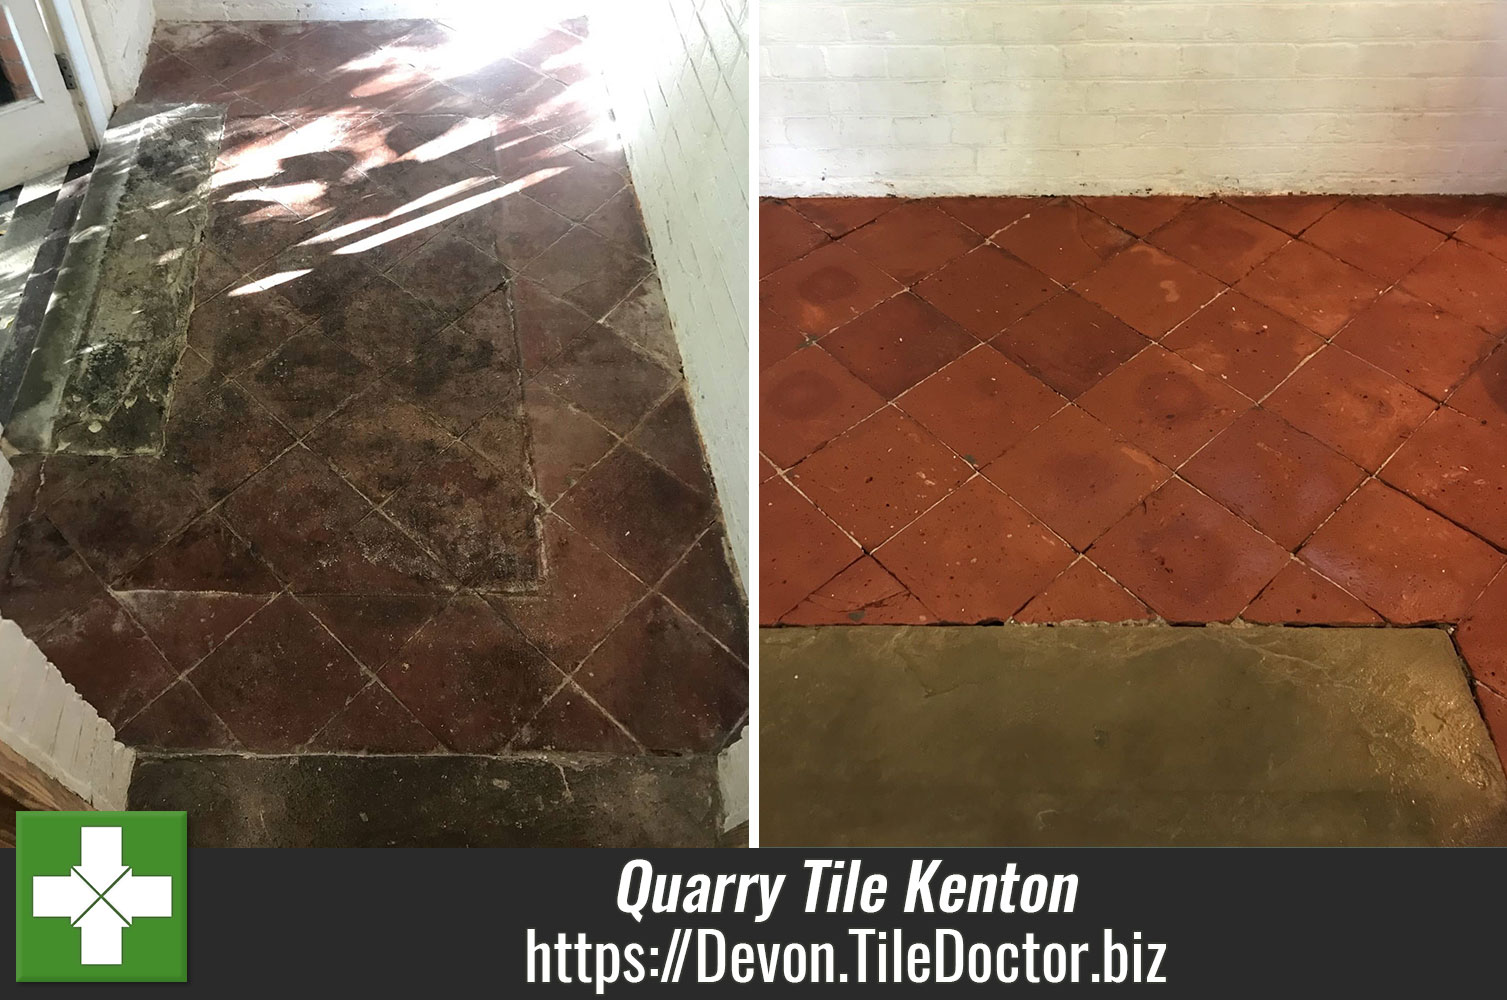 Deep Cleaning Old Quarry Tiles in Devon with Tile Doctor Remove and Go